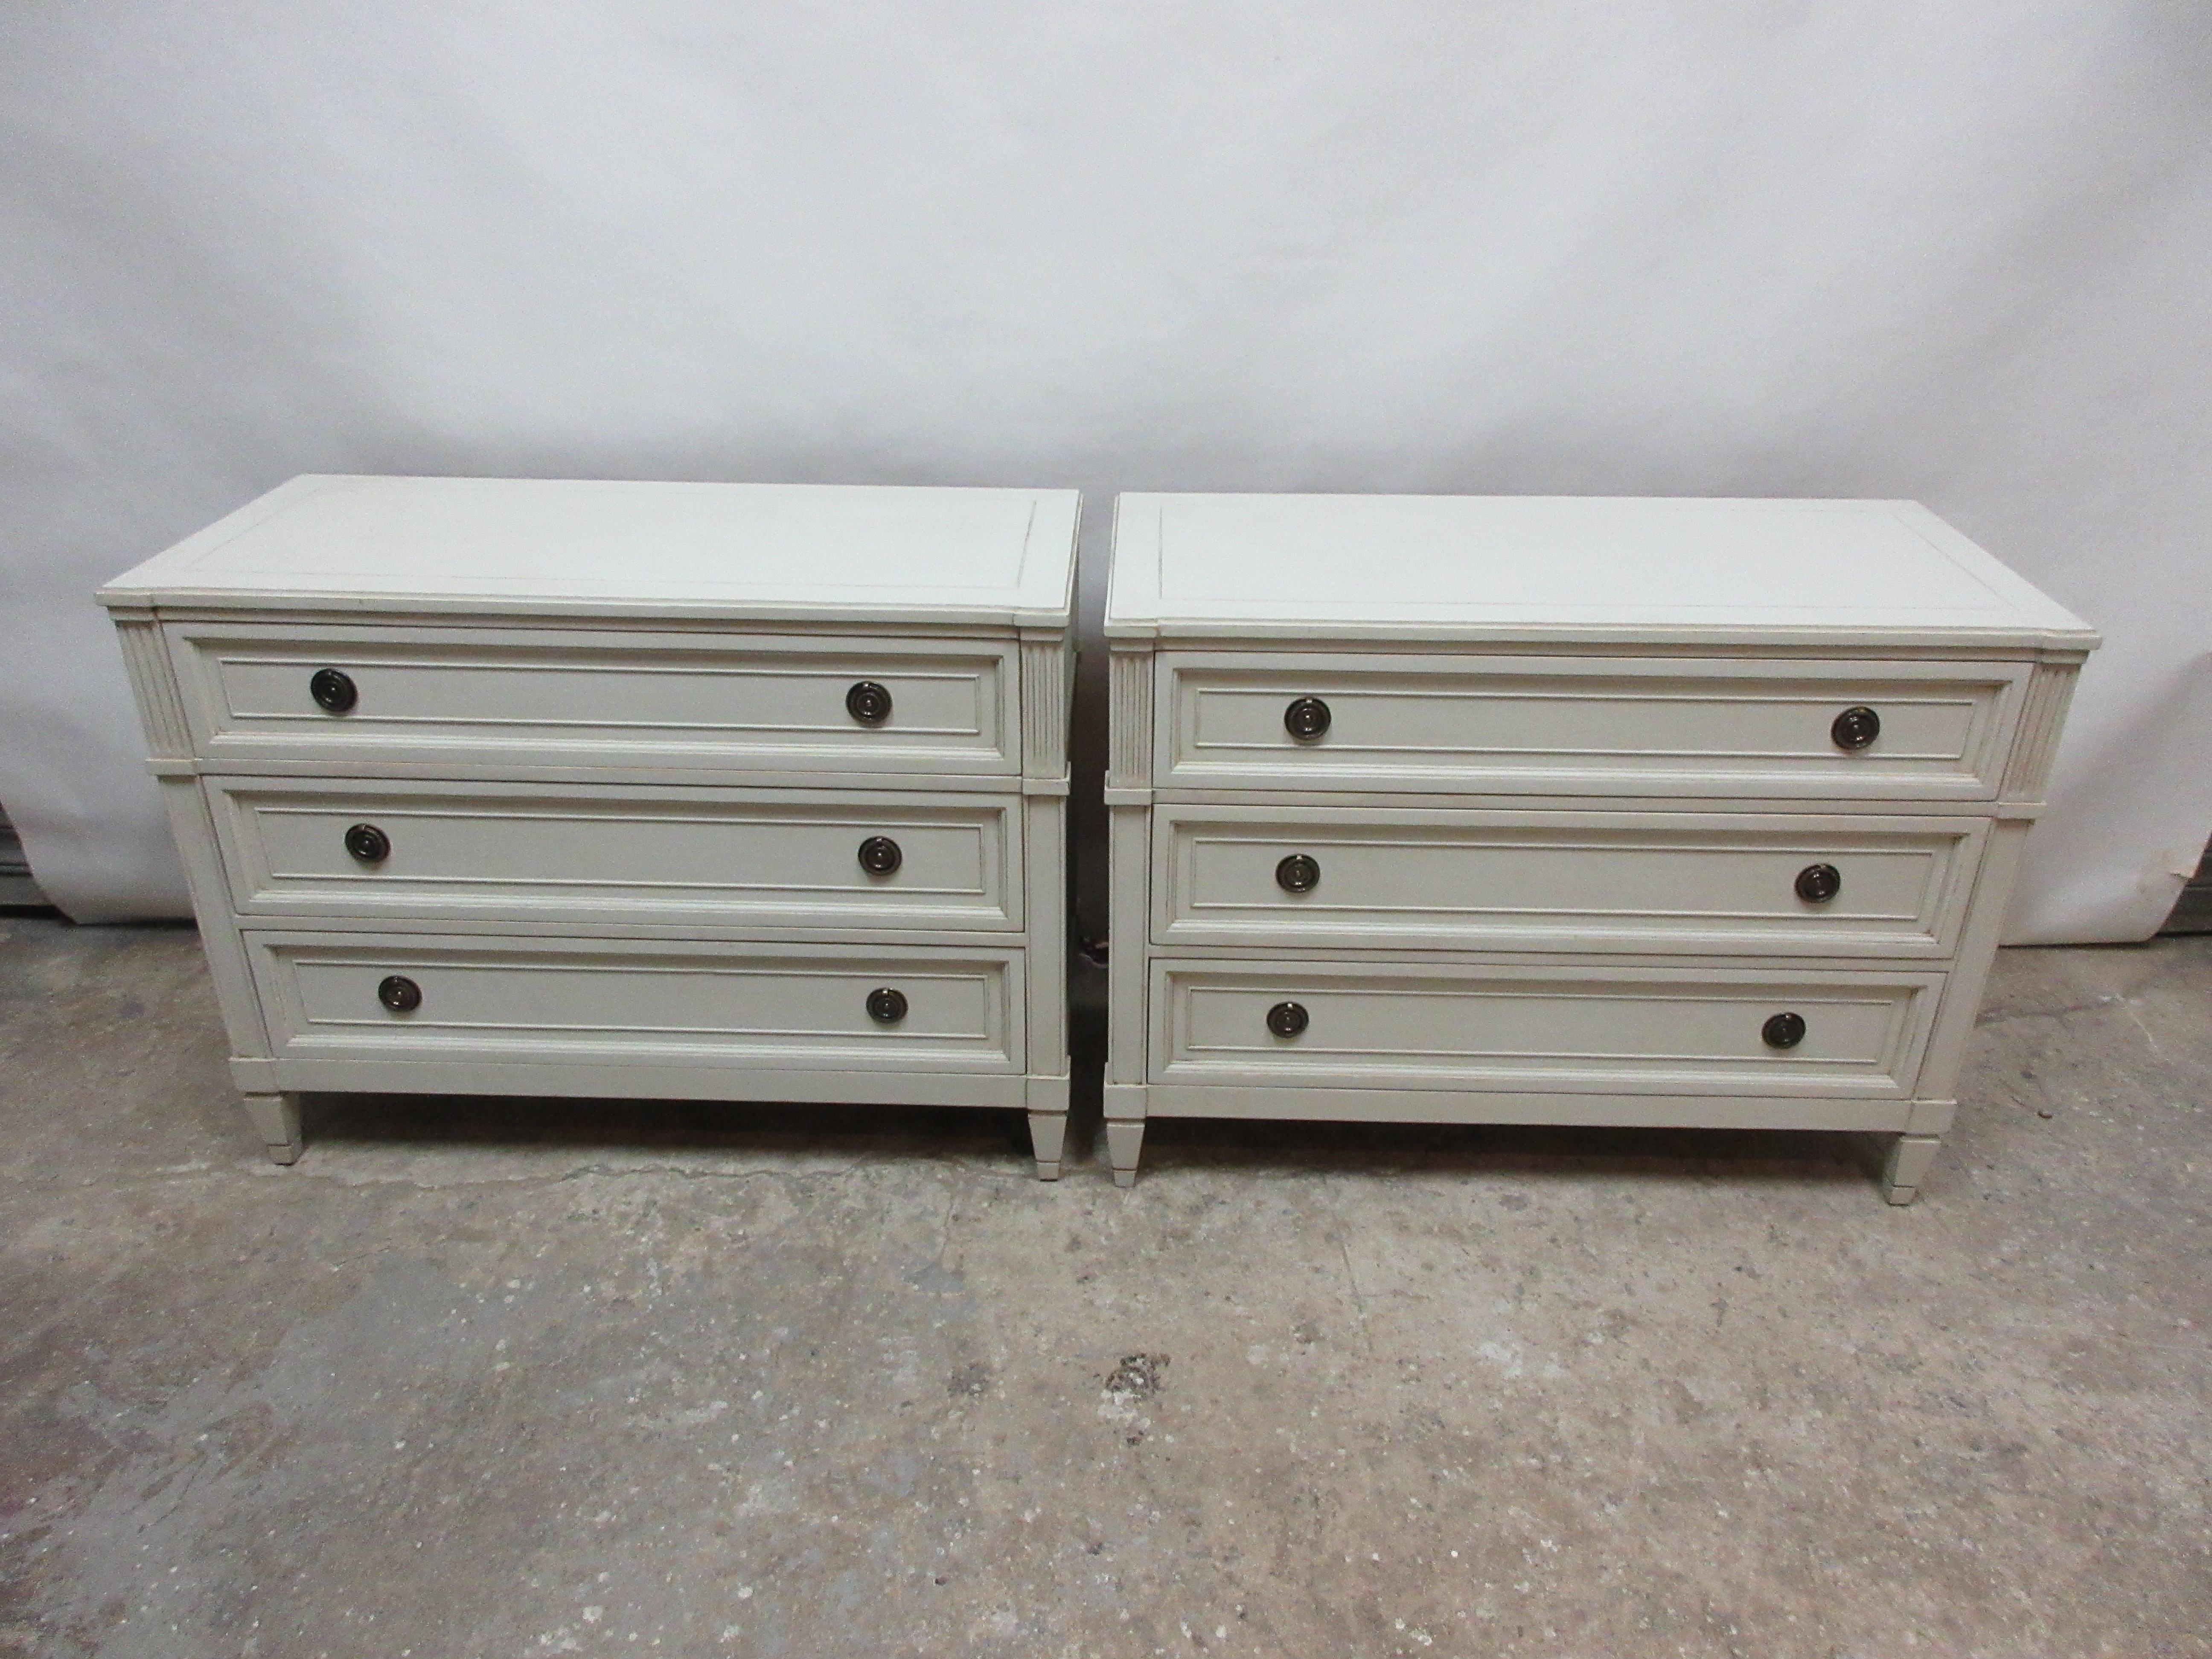 This is a set of 2 Swedish Gustavian 3 drawer chest, they have been restored and repainted with milk paints 